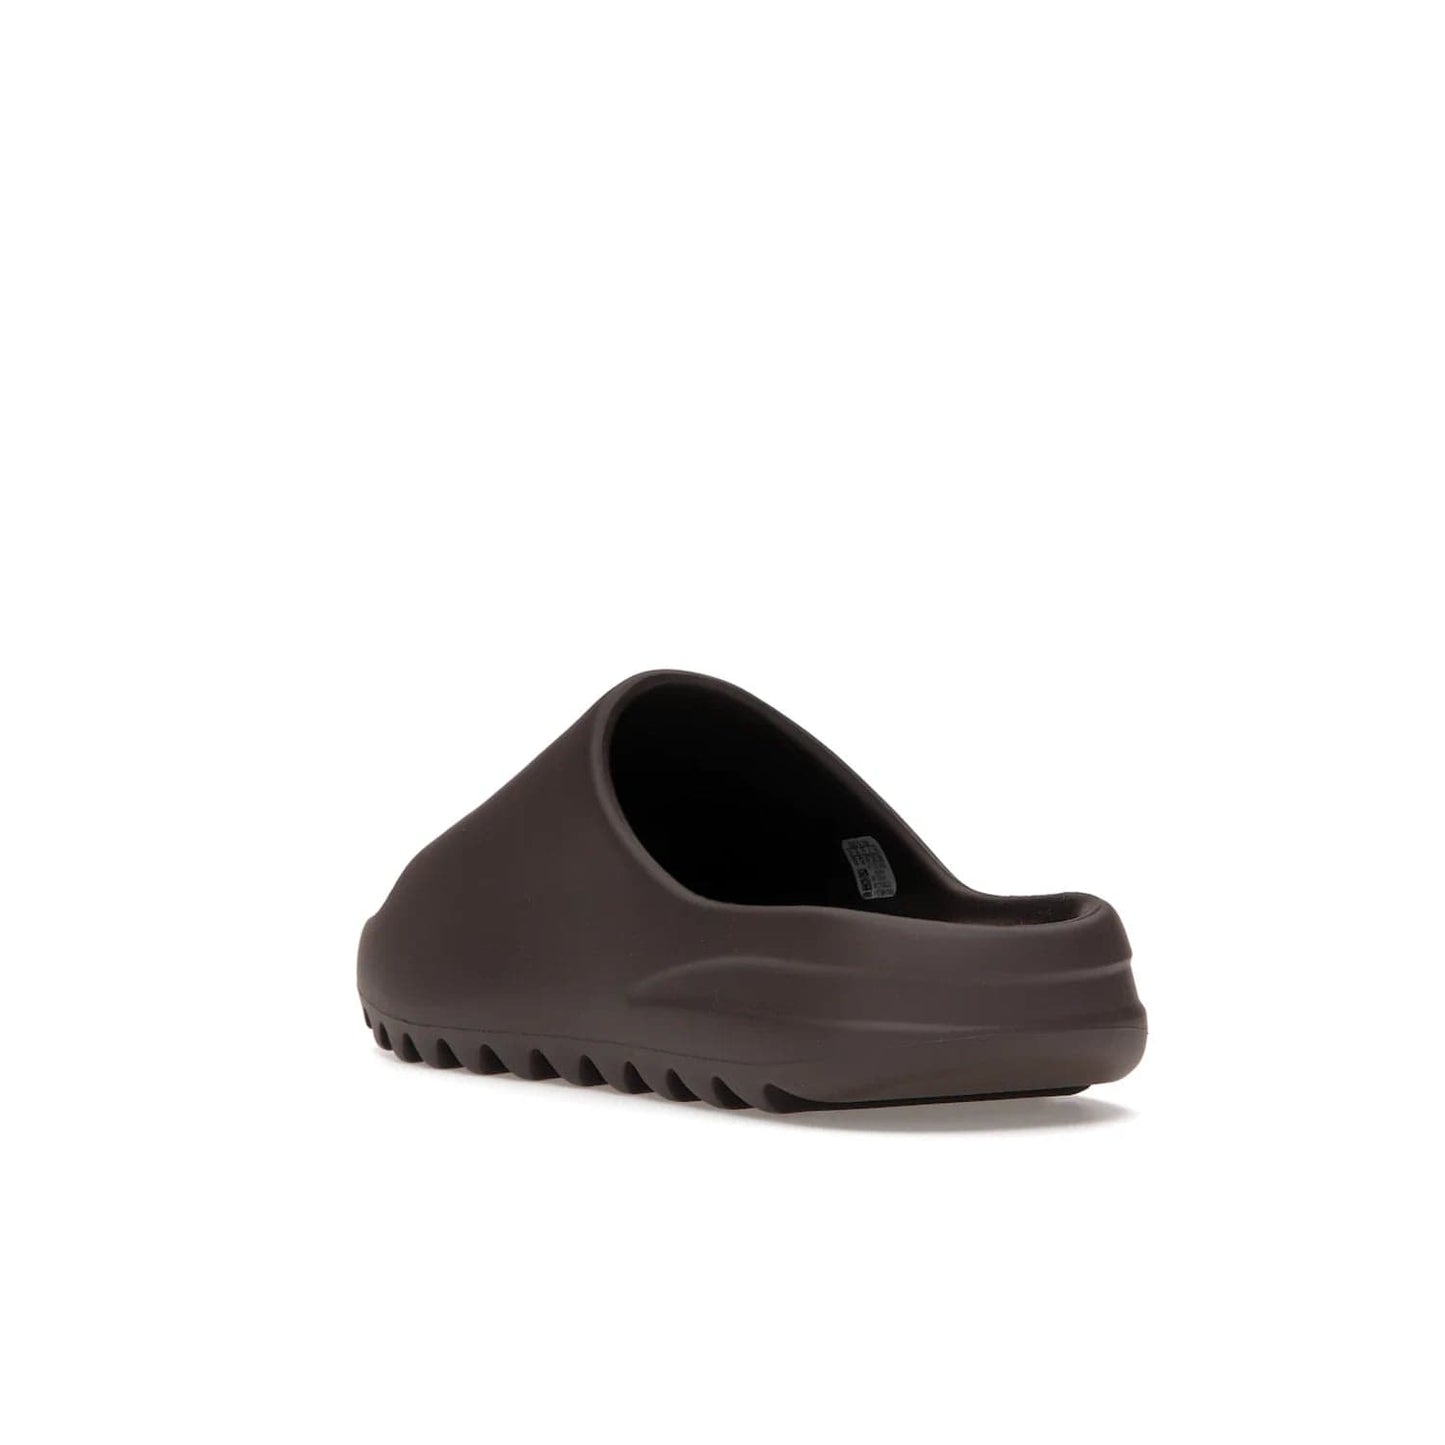 adidas Yeezy Slide Soot - Image 25 - Only at www.BallersClubKickz.com - Shop the Yeezy Slide Soot sneaker by Adidas, a sleek blend of form and function. Monochrome silhouette in Soot/Soot/Soot. Lightweight EVA foam offers comfort and durability. Get the must-have style today.